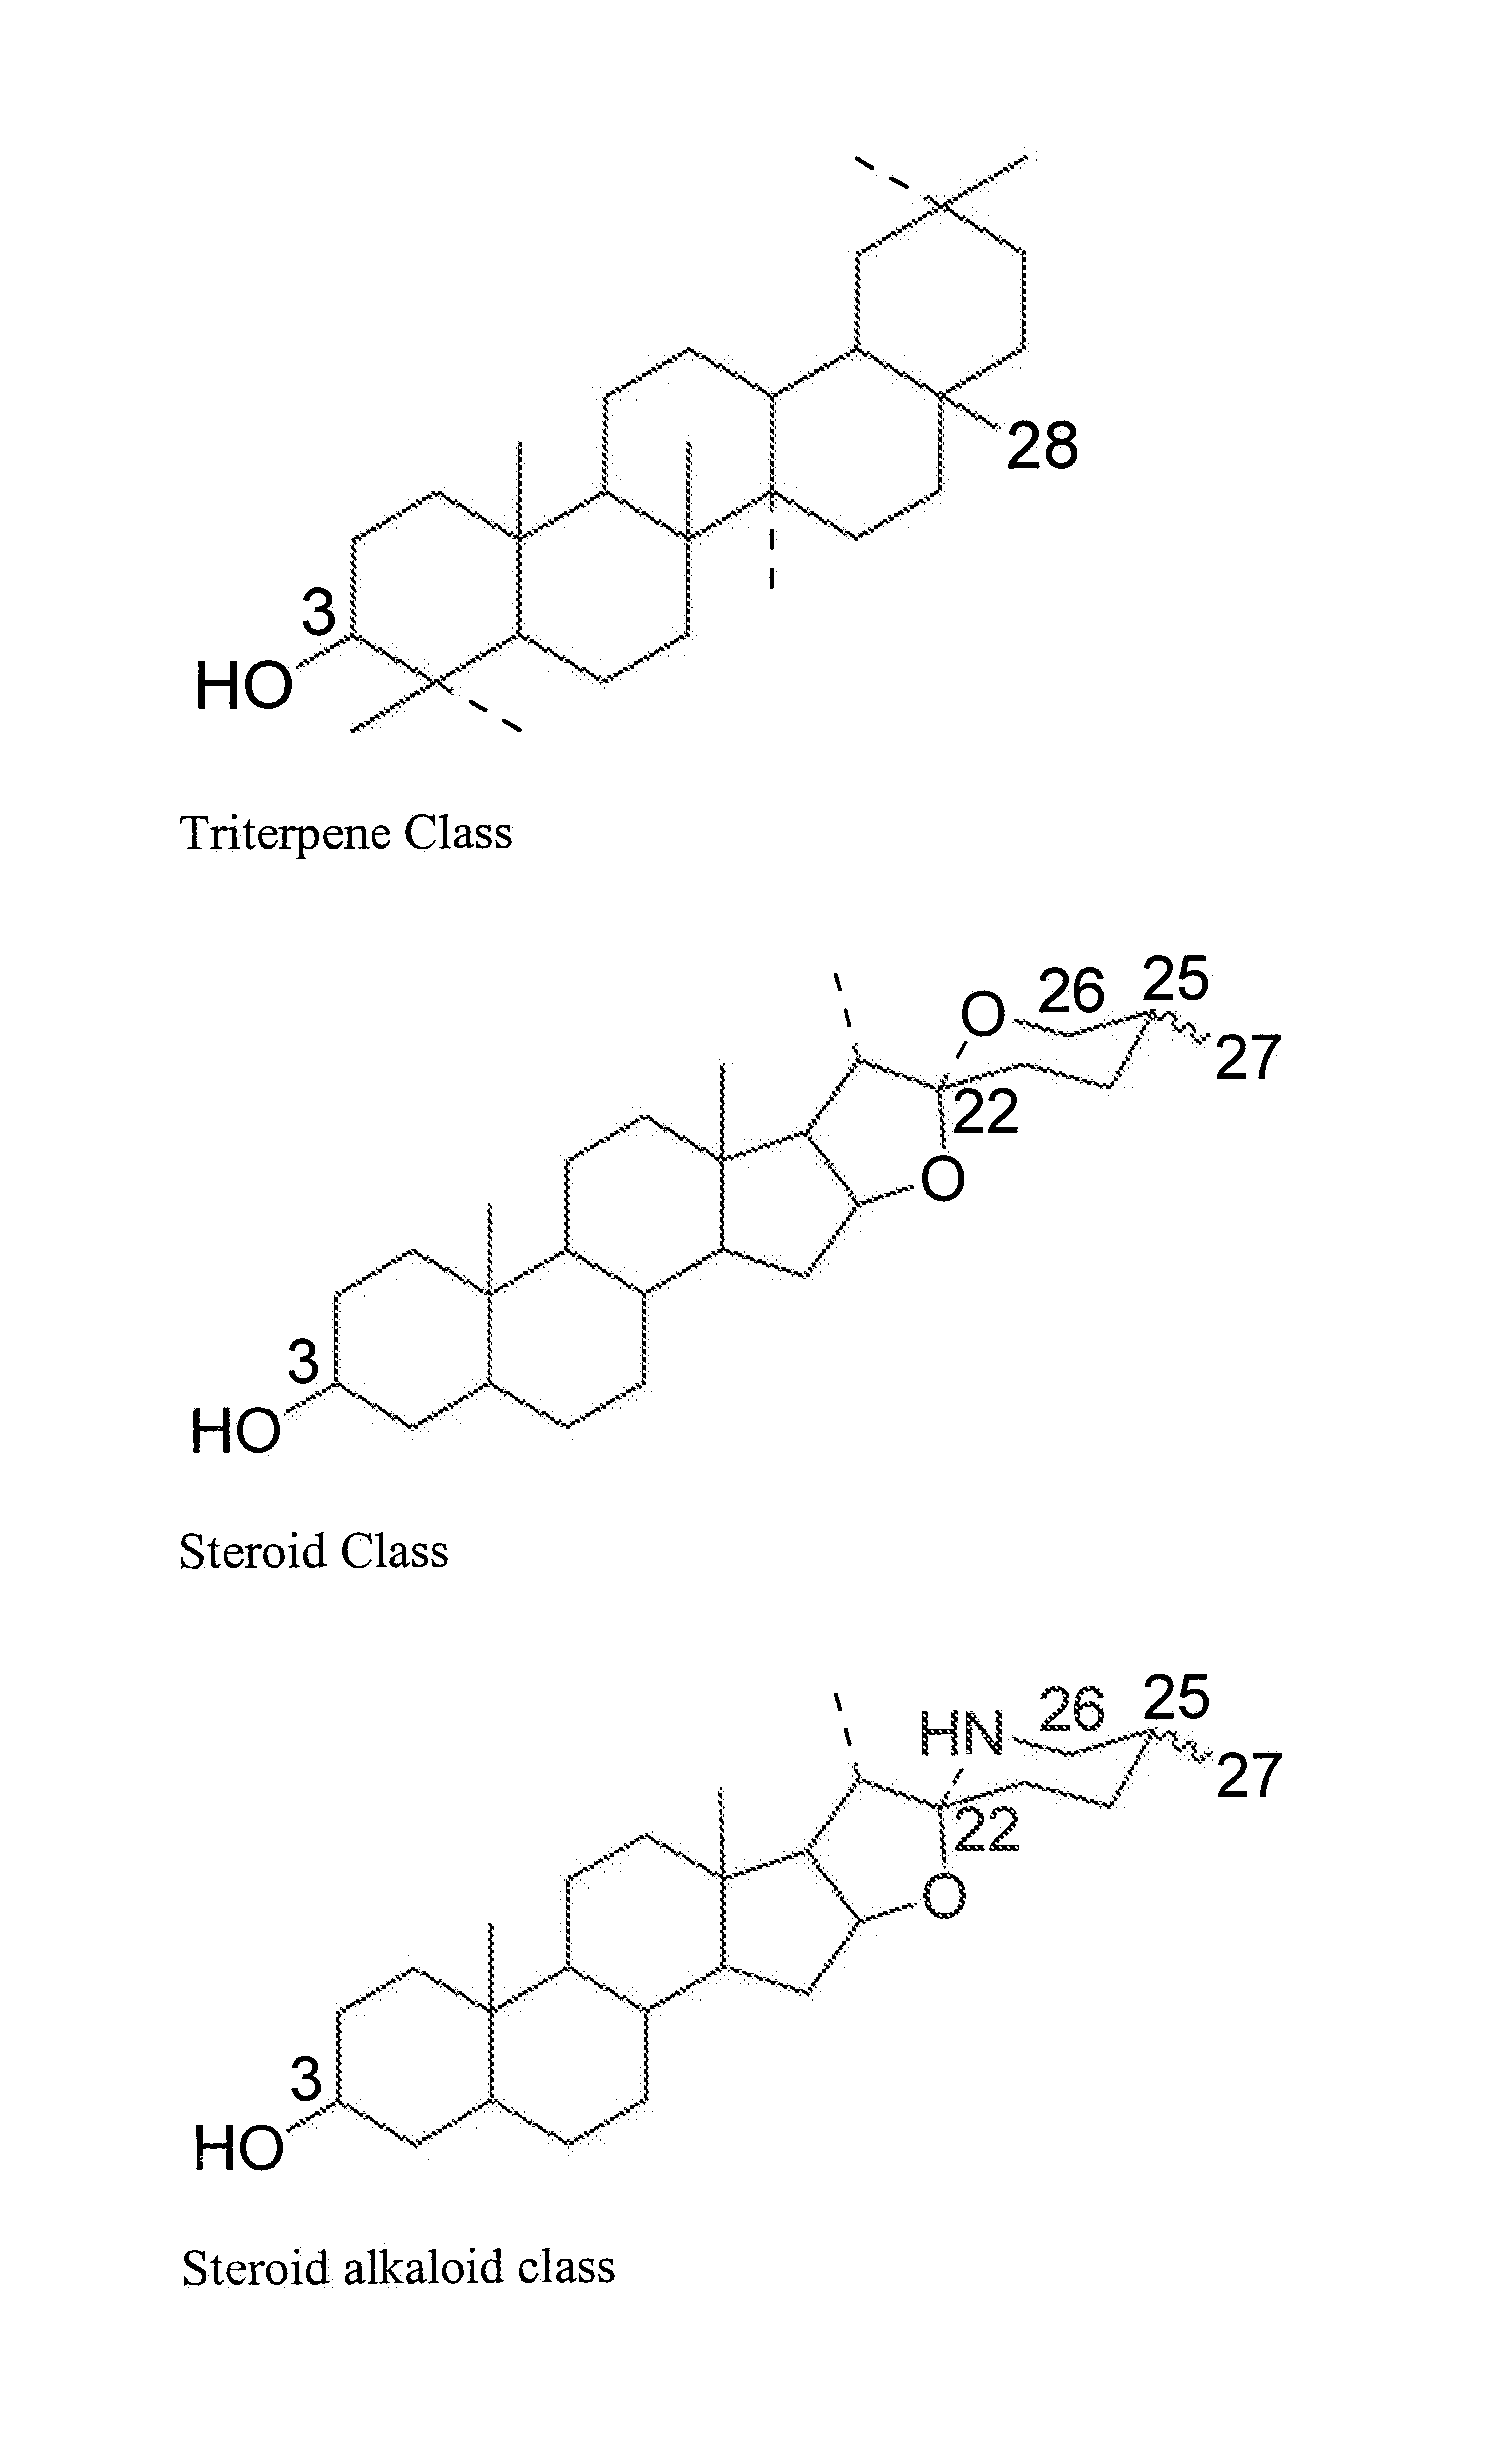 Particle structures comprising sterols and saponins